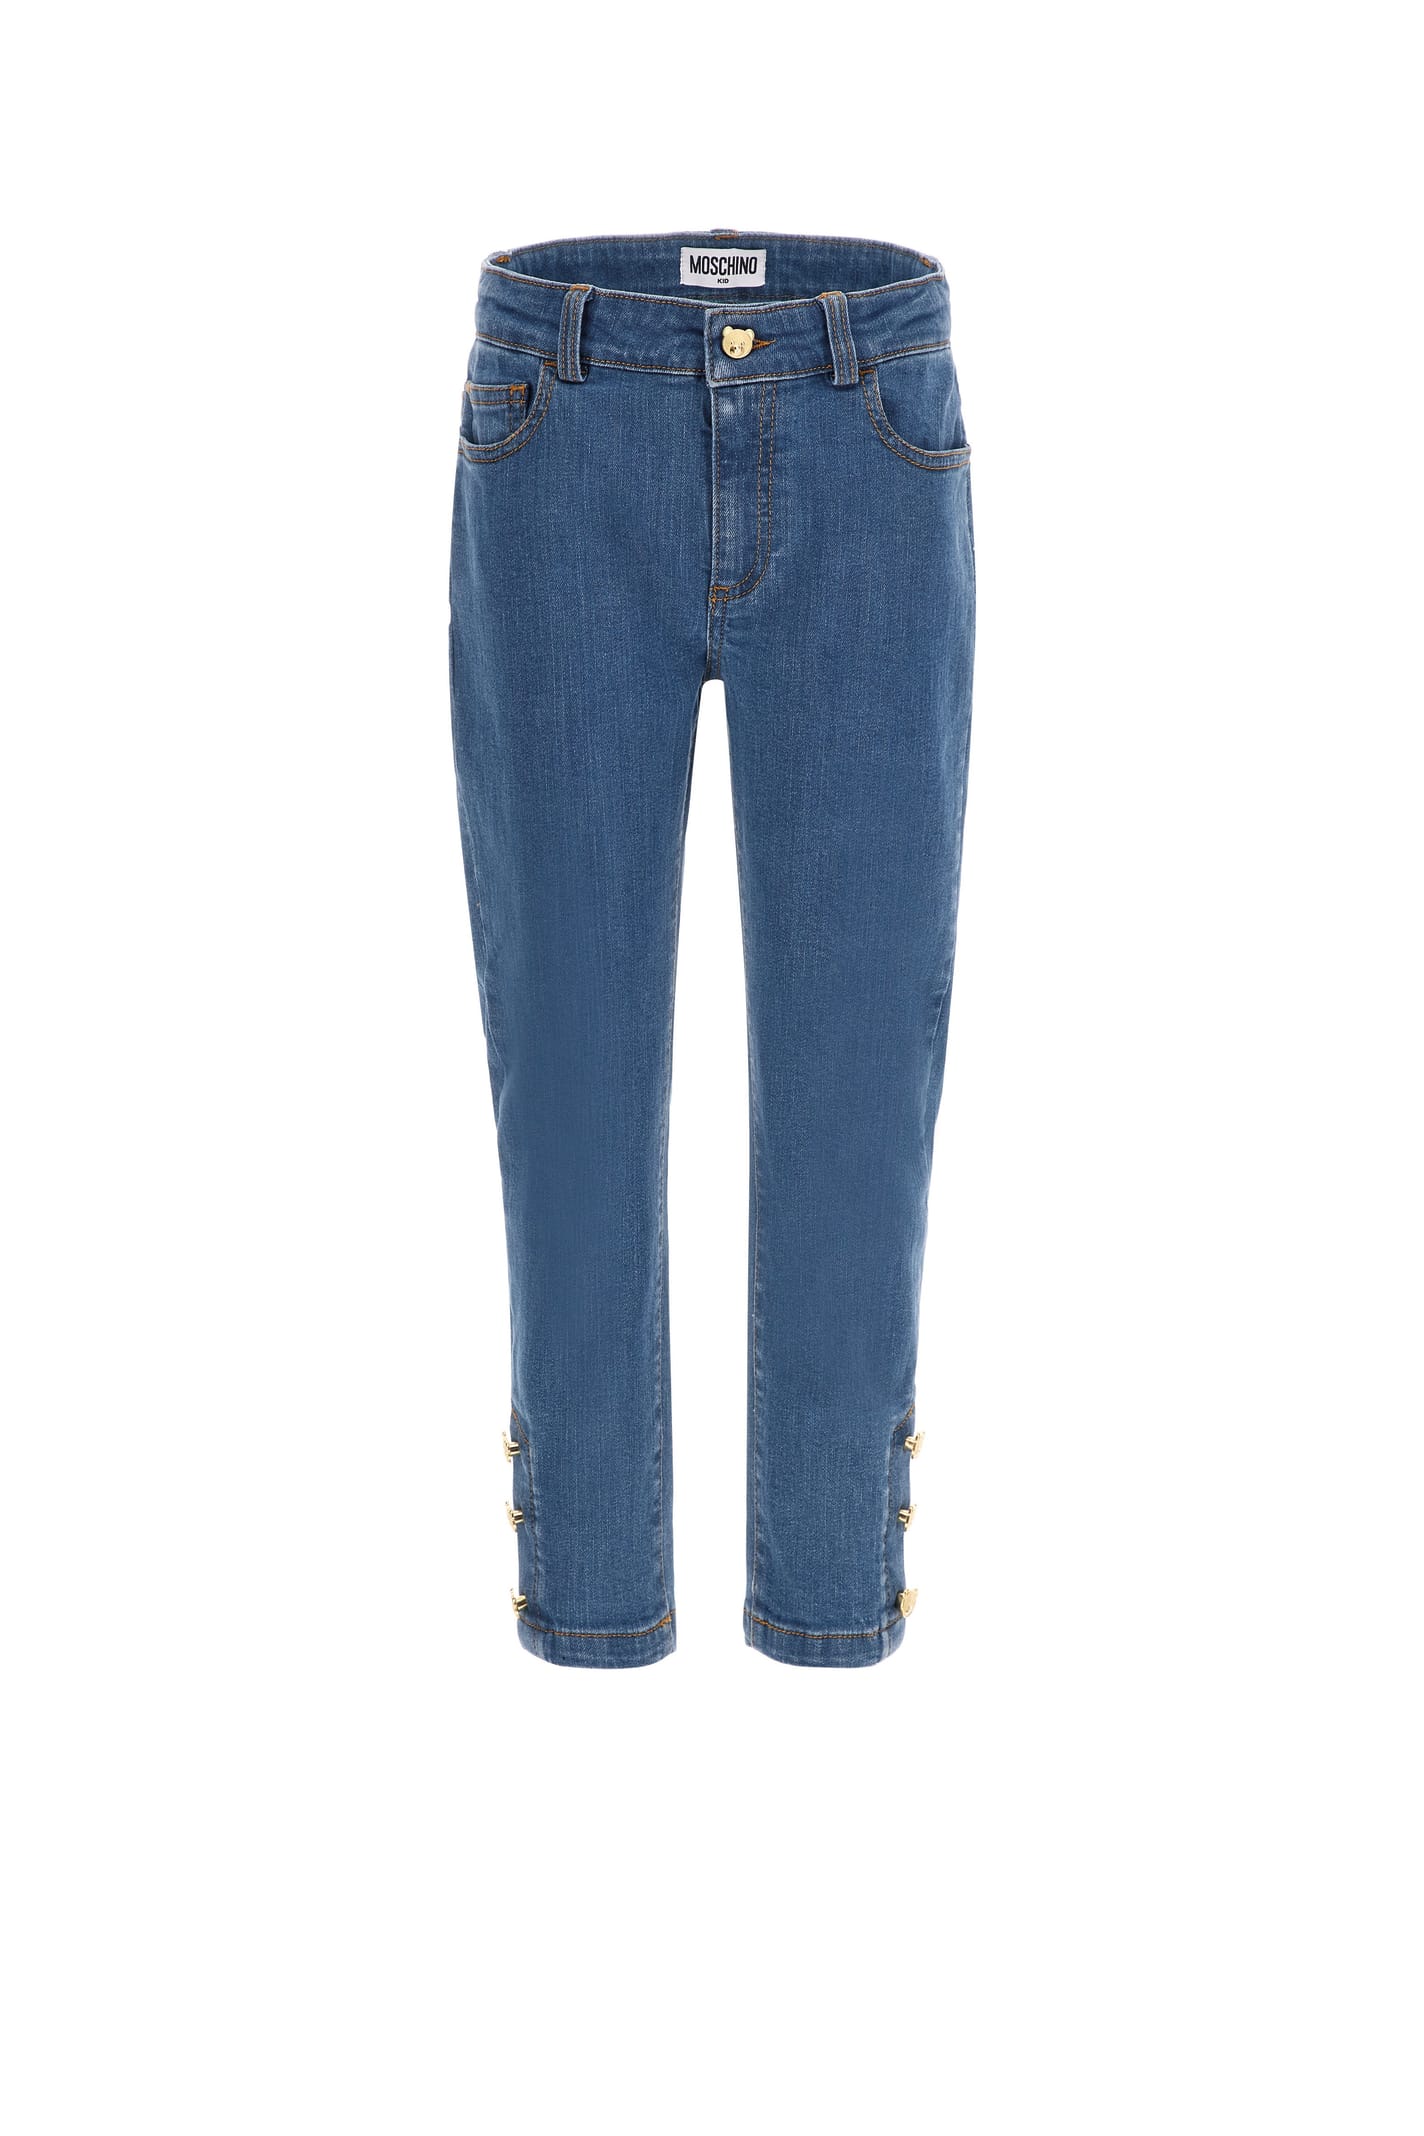 Moschino Kids' Cigarette Jeans In Blue